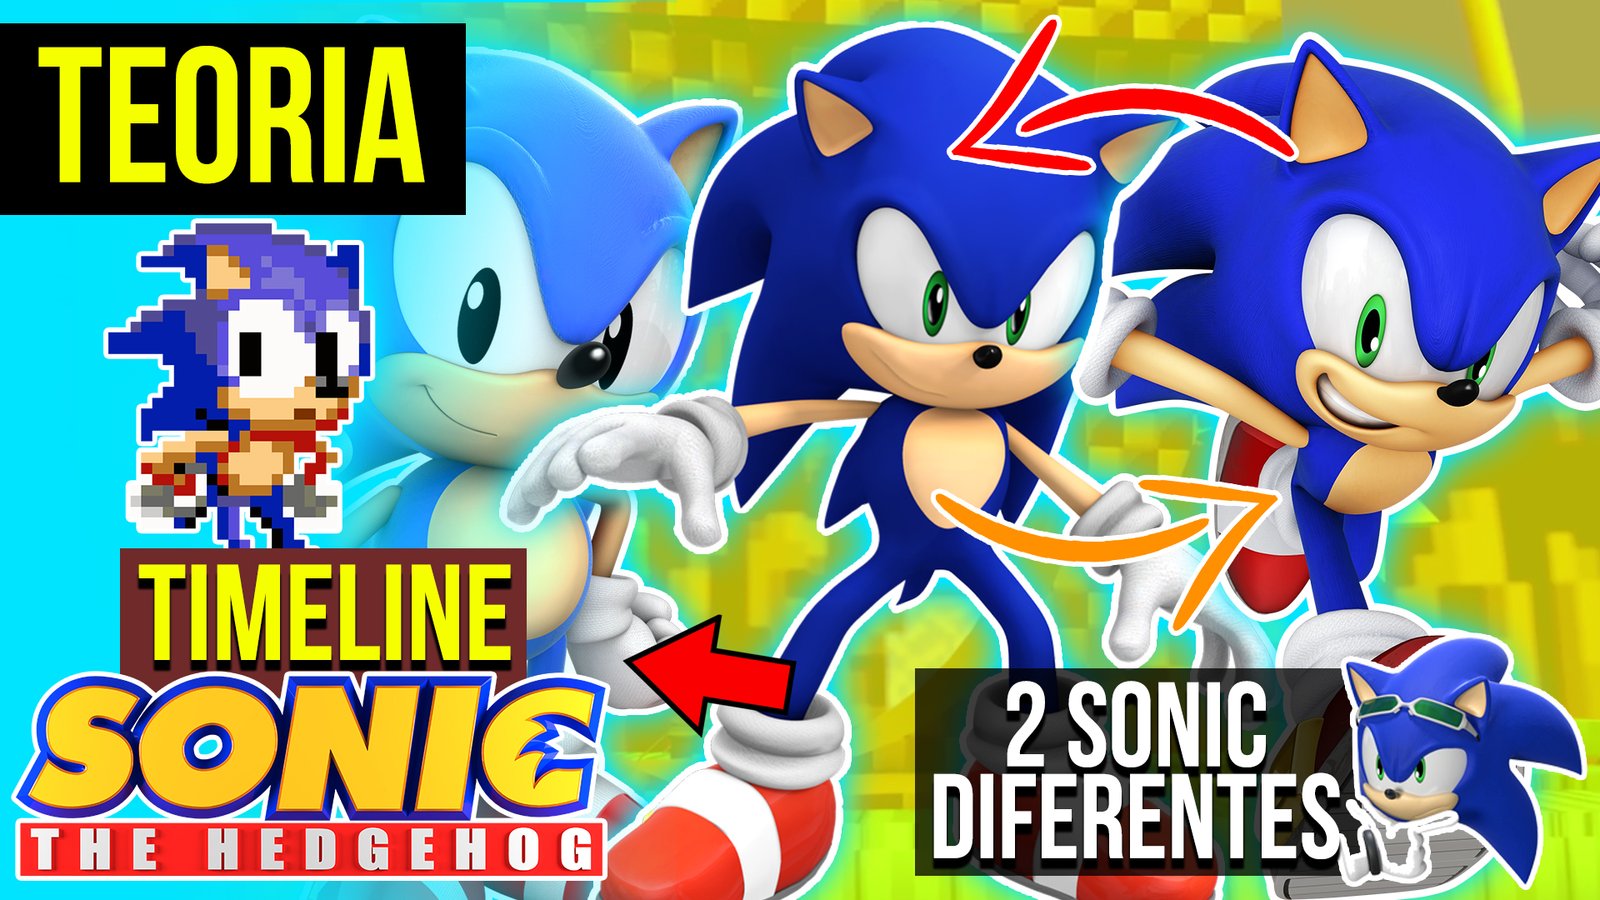 Sonic time line